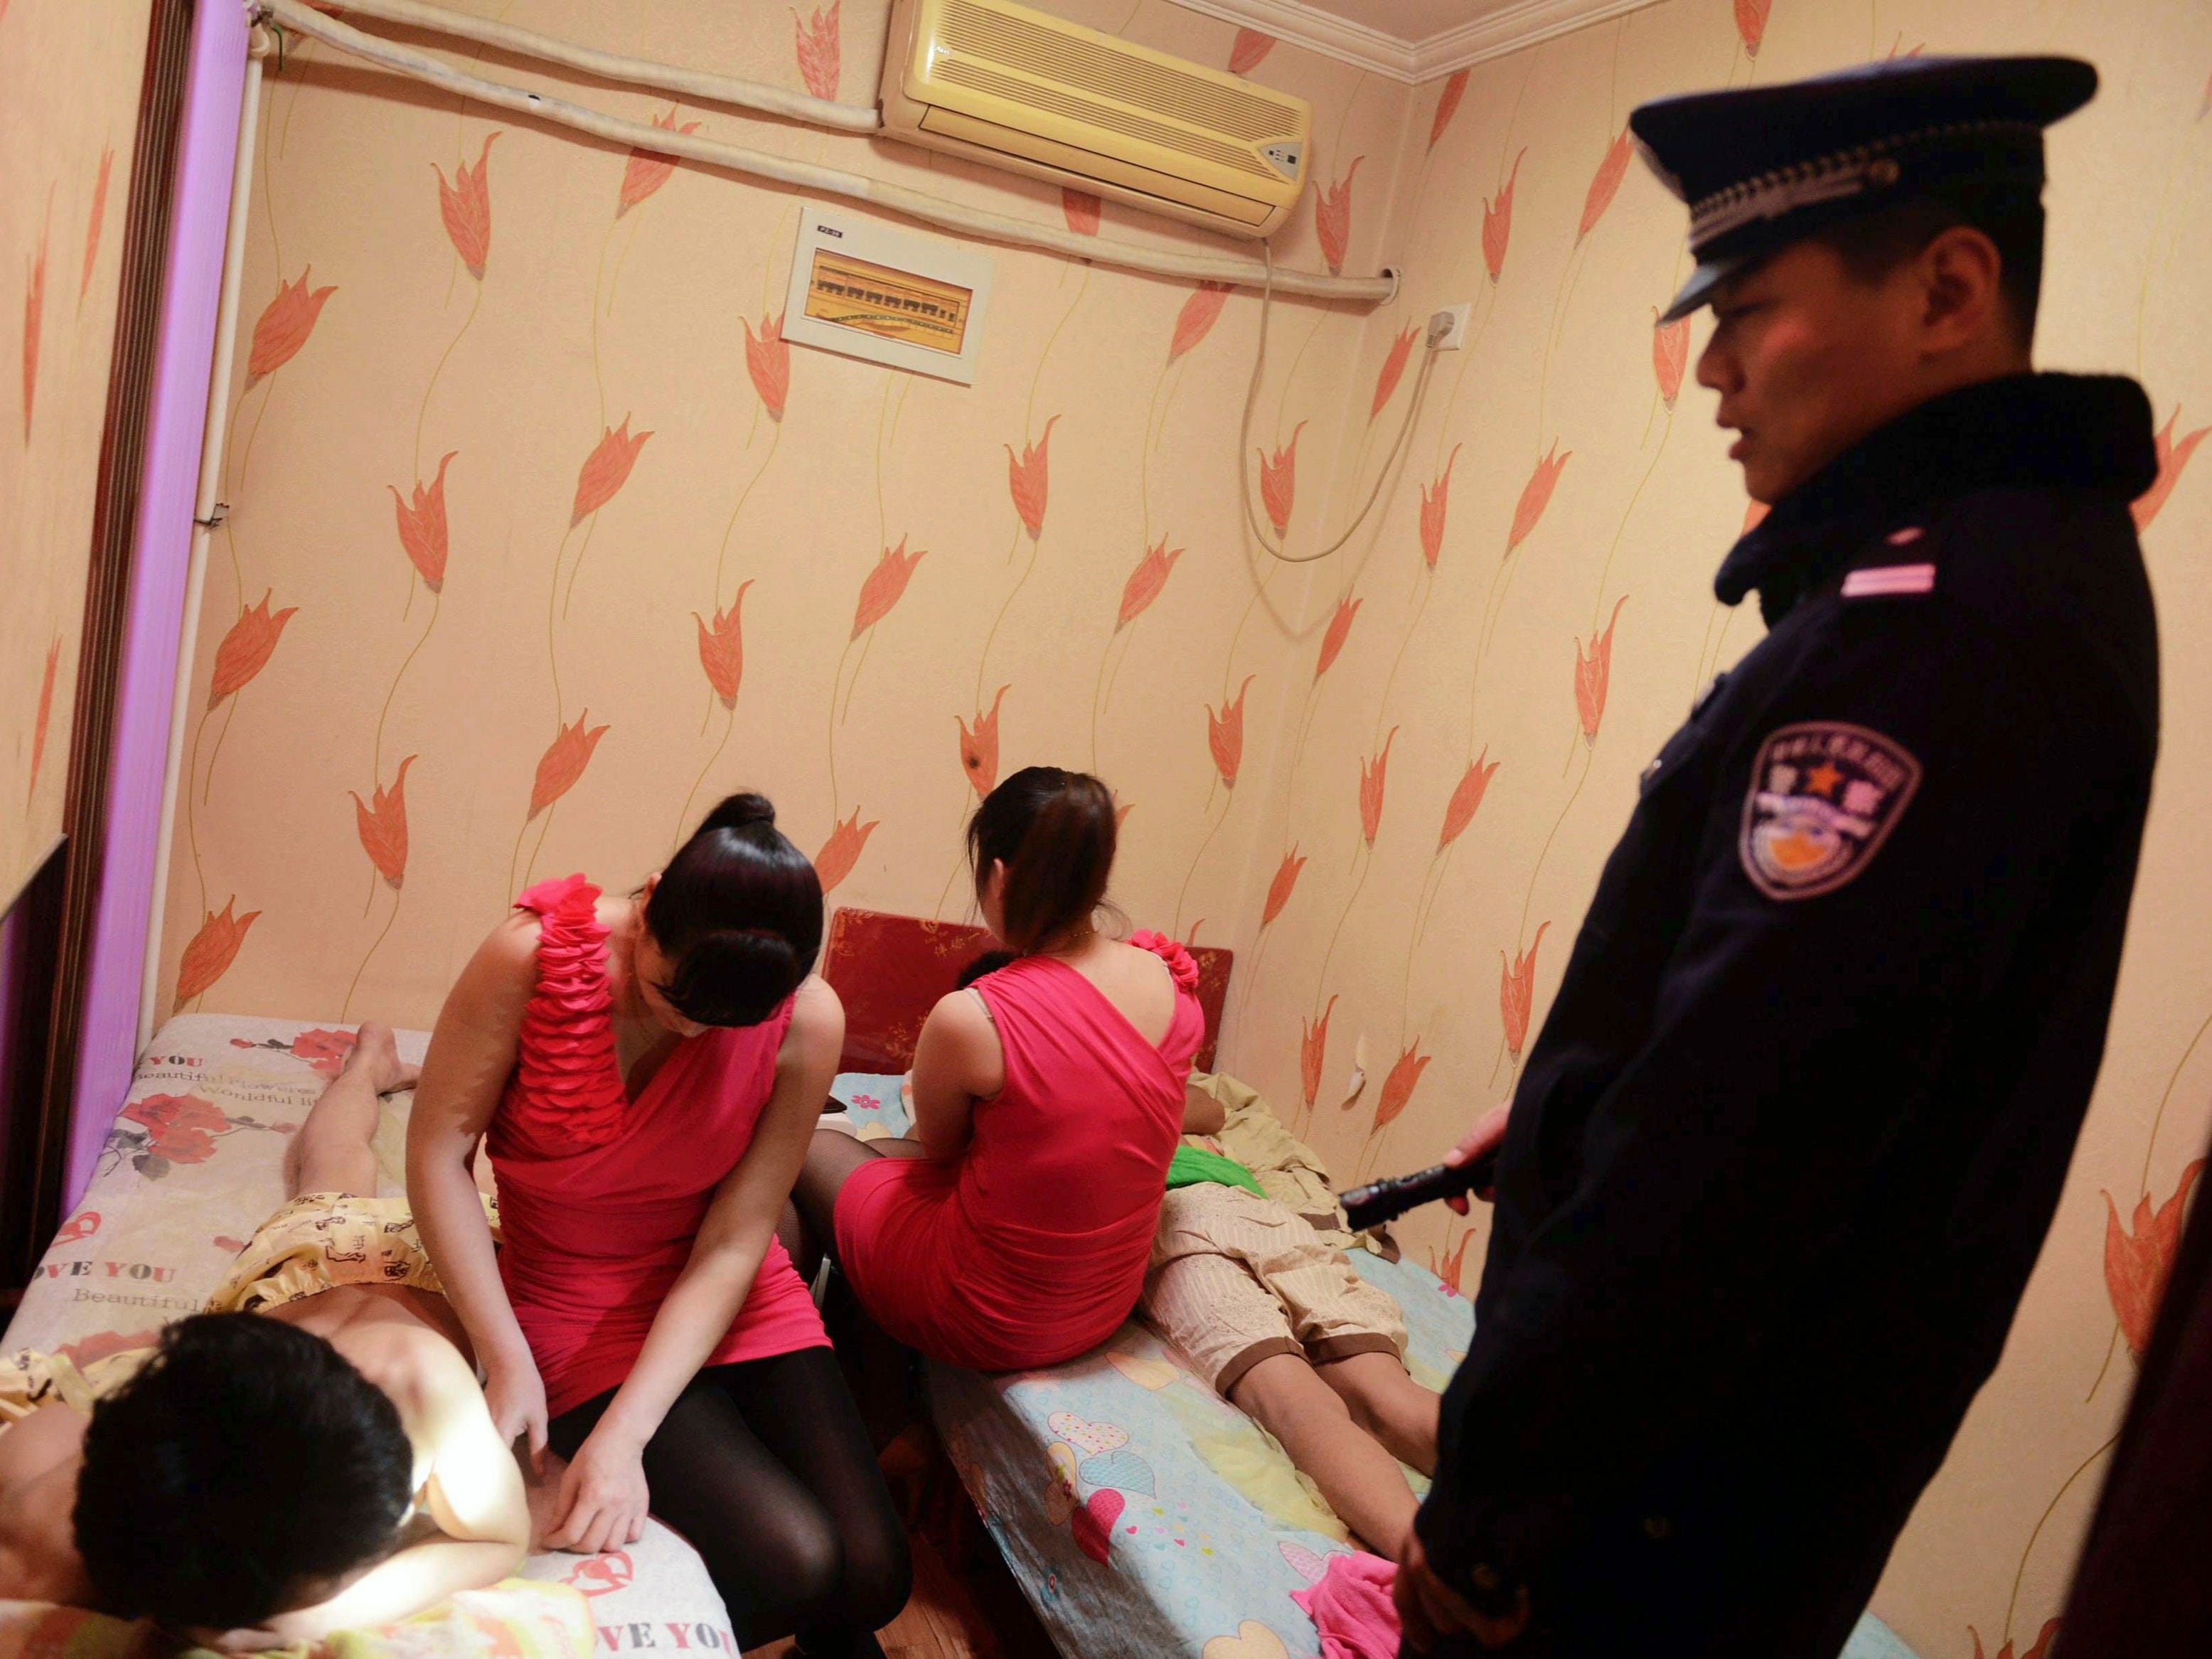  Phone numbers of Whores in Qingdao, China